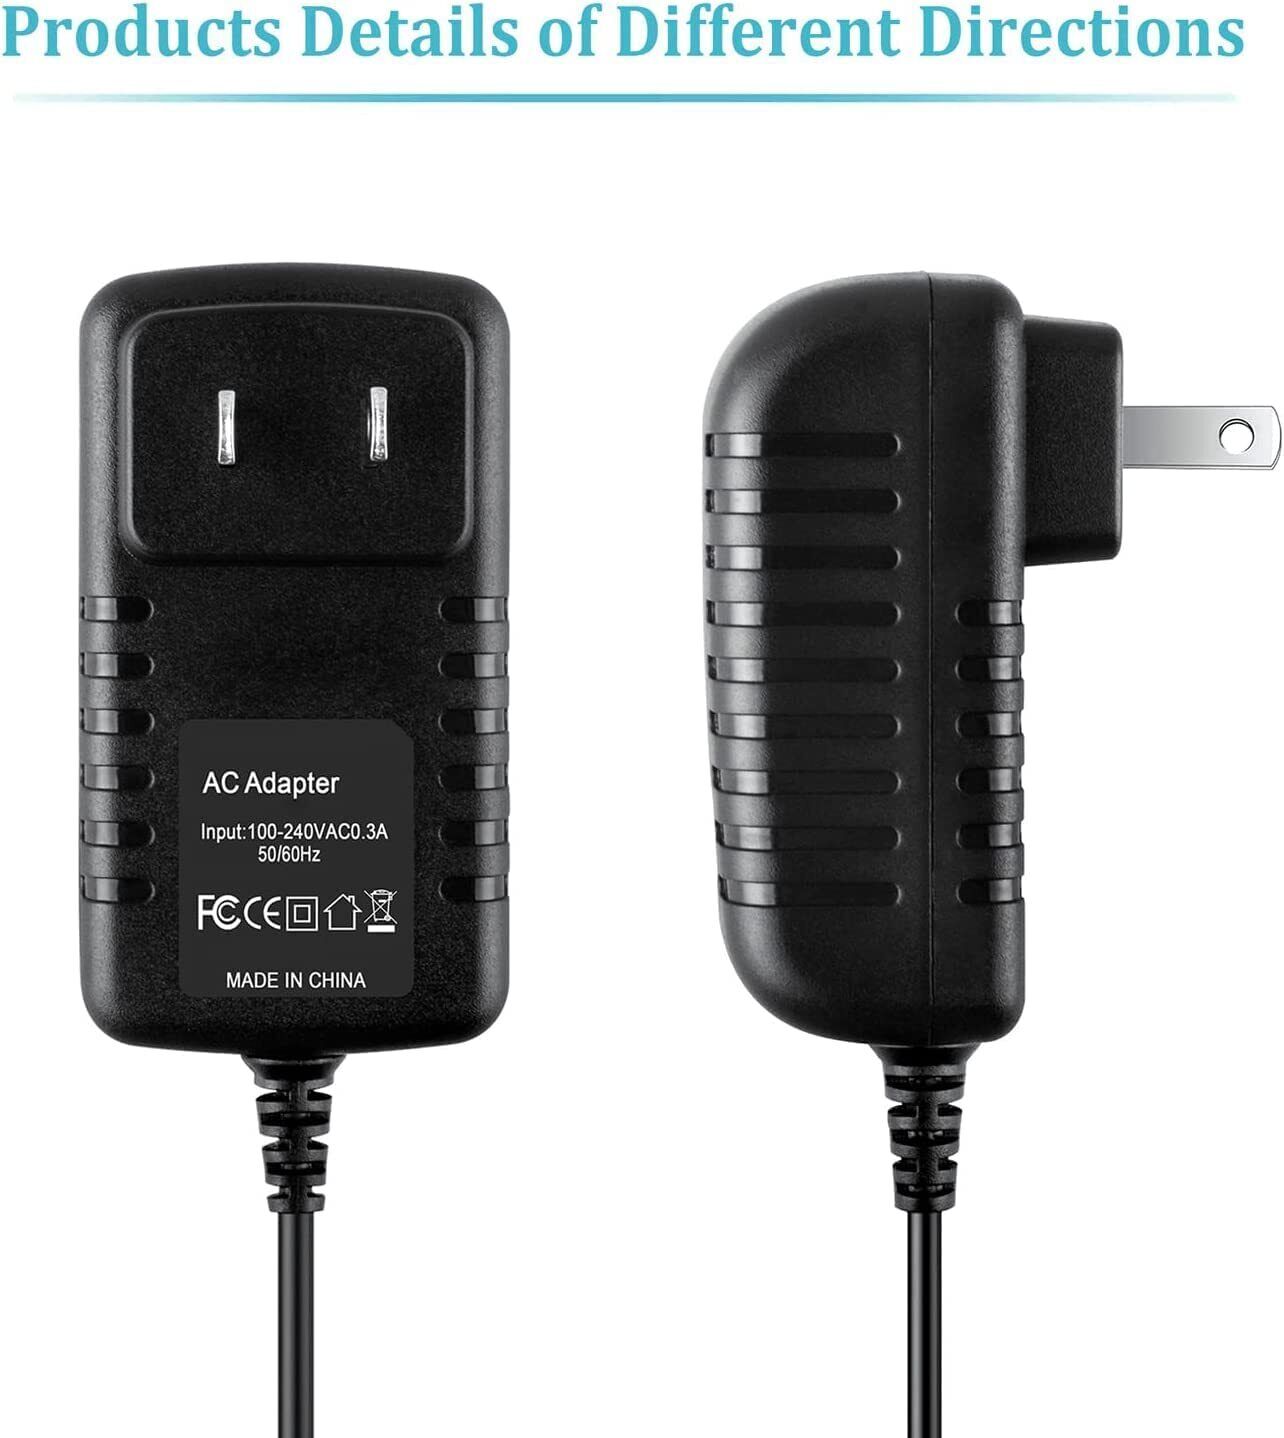 24V AC Adapter Charger Fit for LifePro Life Pro Sonic X SonicX LPSNCXBLK LPSNCXBLU LX SonicLX LPSNCLXBLK LPSNCLXBLU Plus